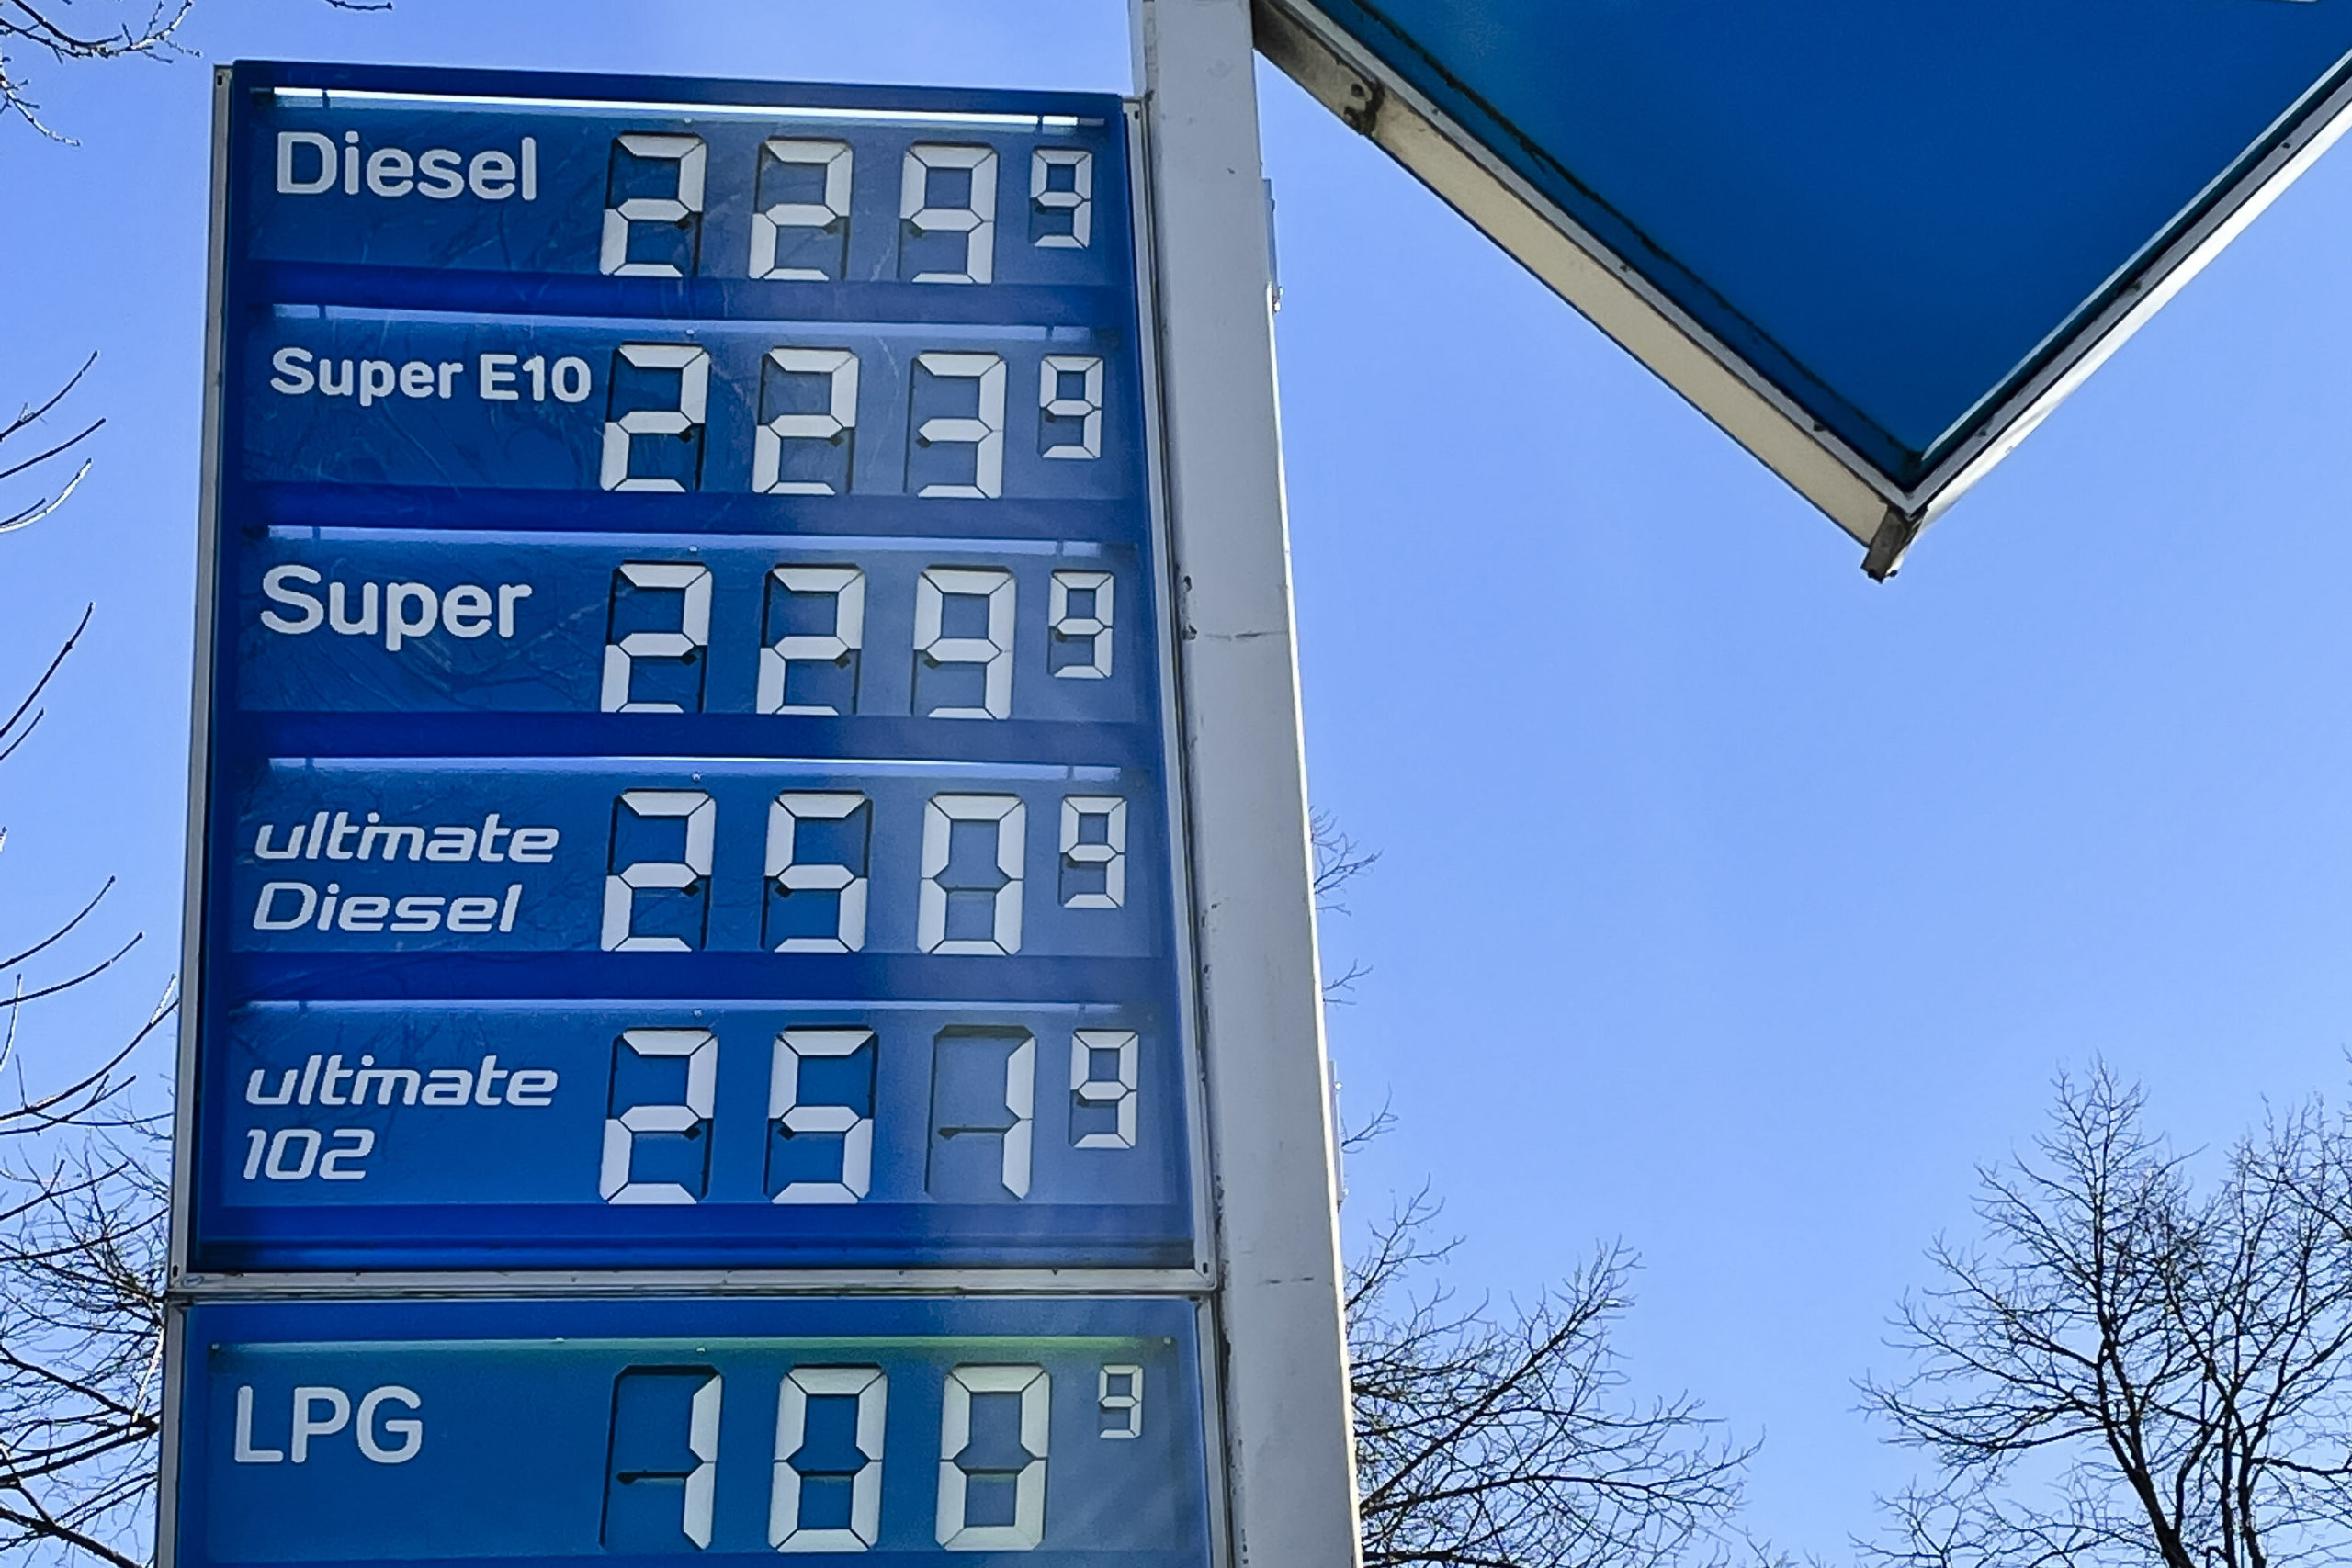 When will Germany's fuel tax cut come into force?